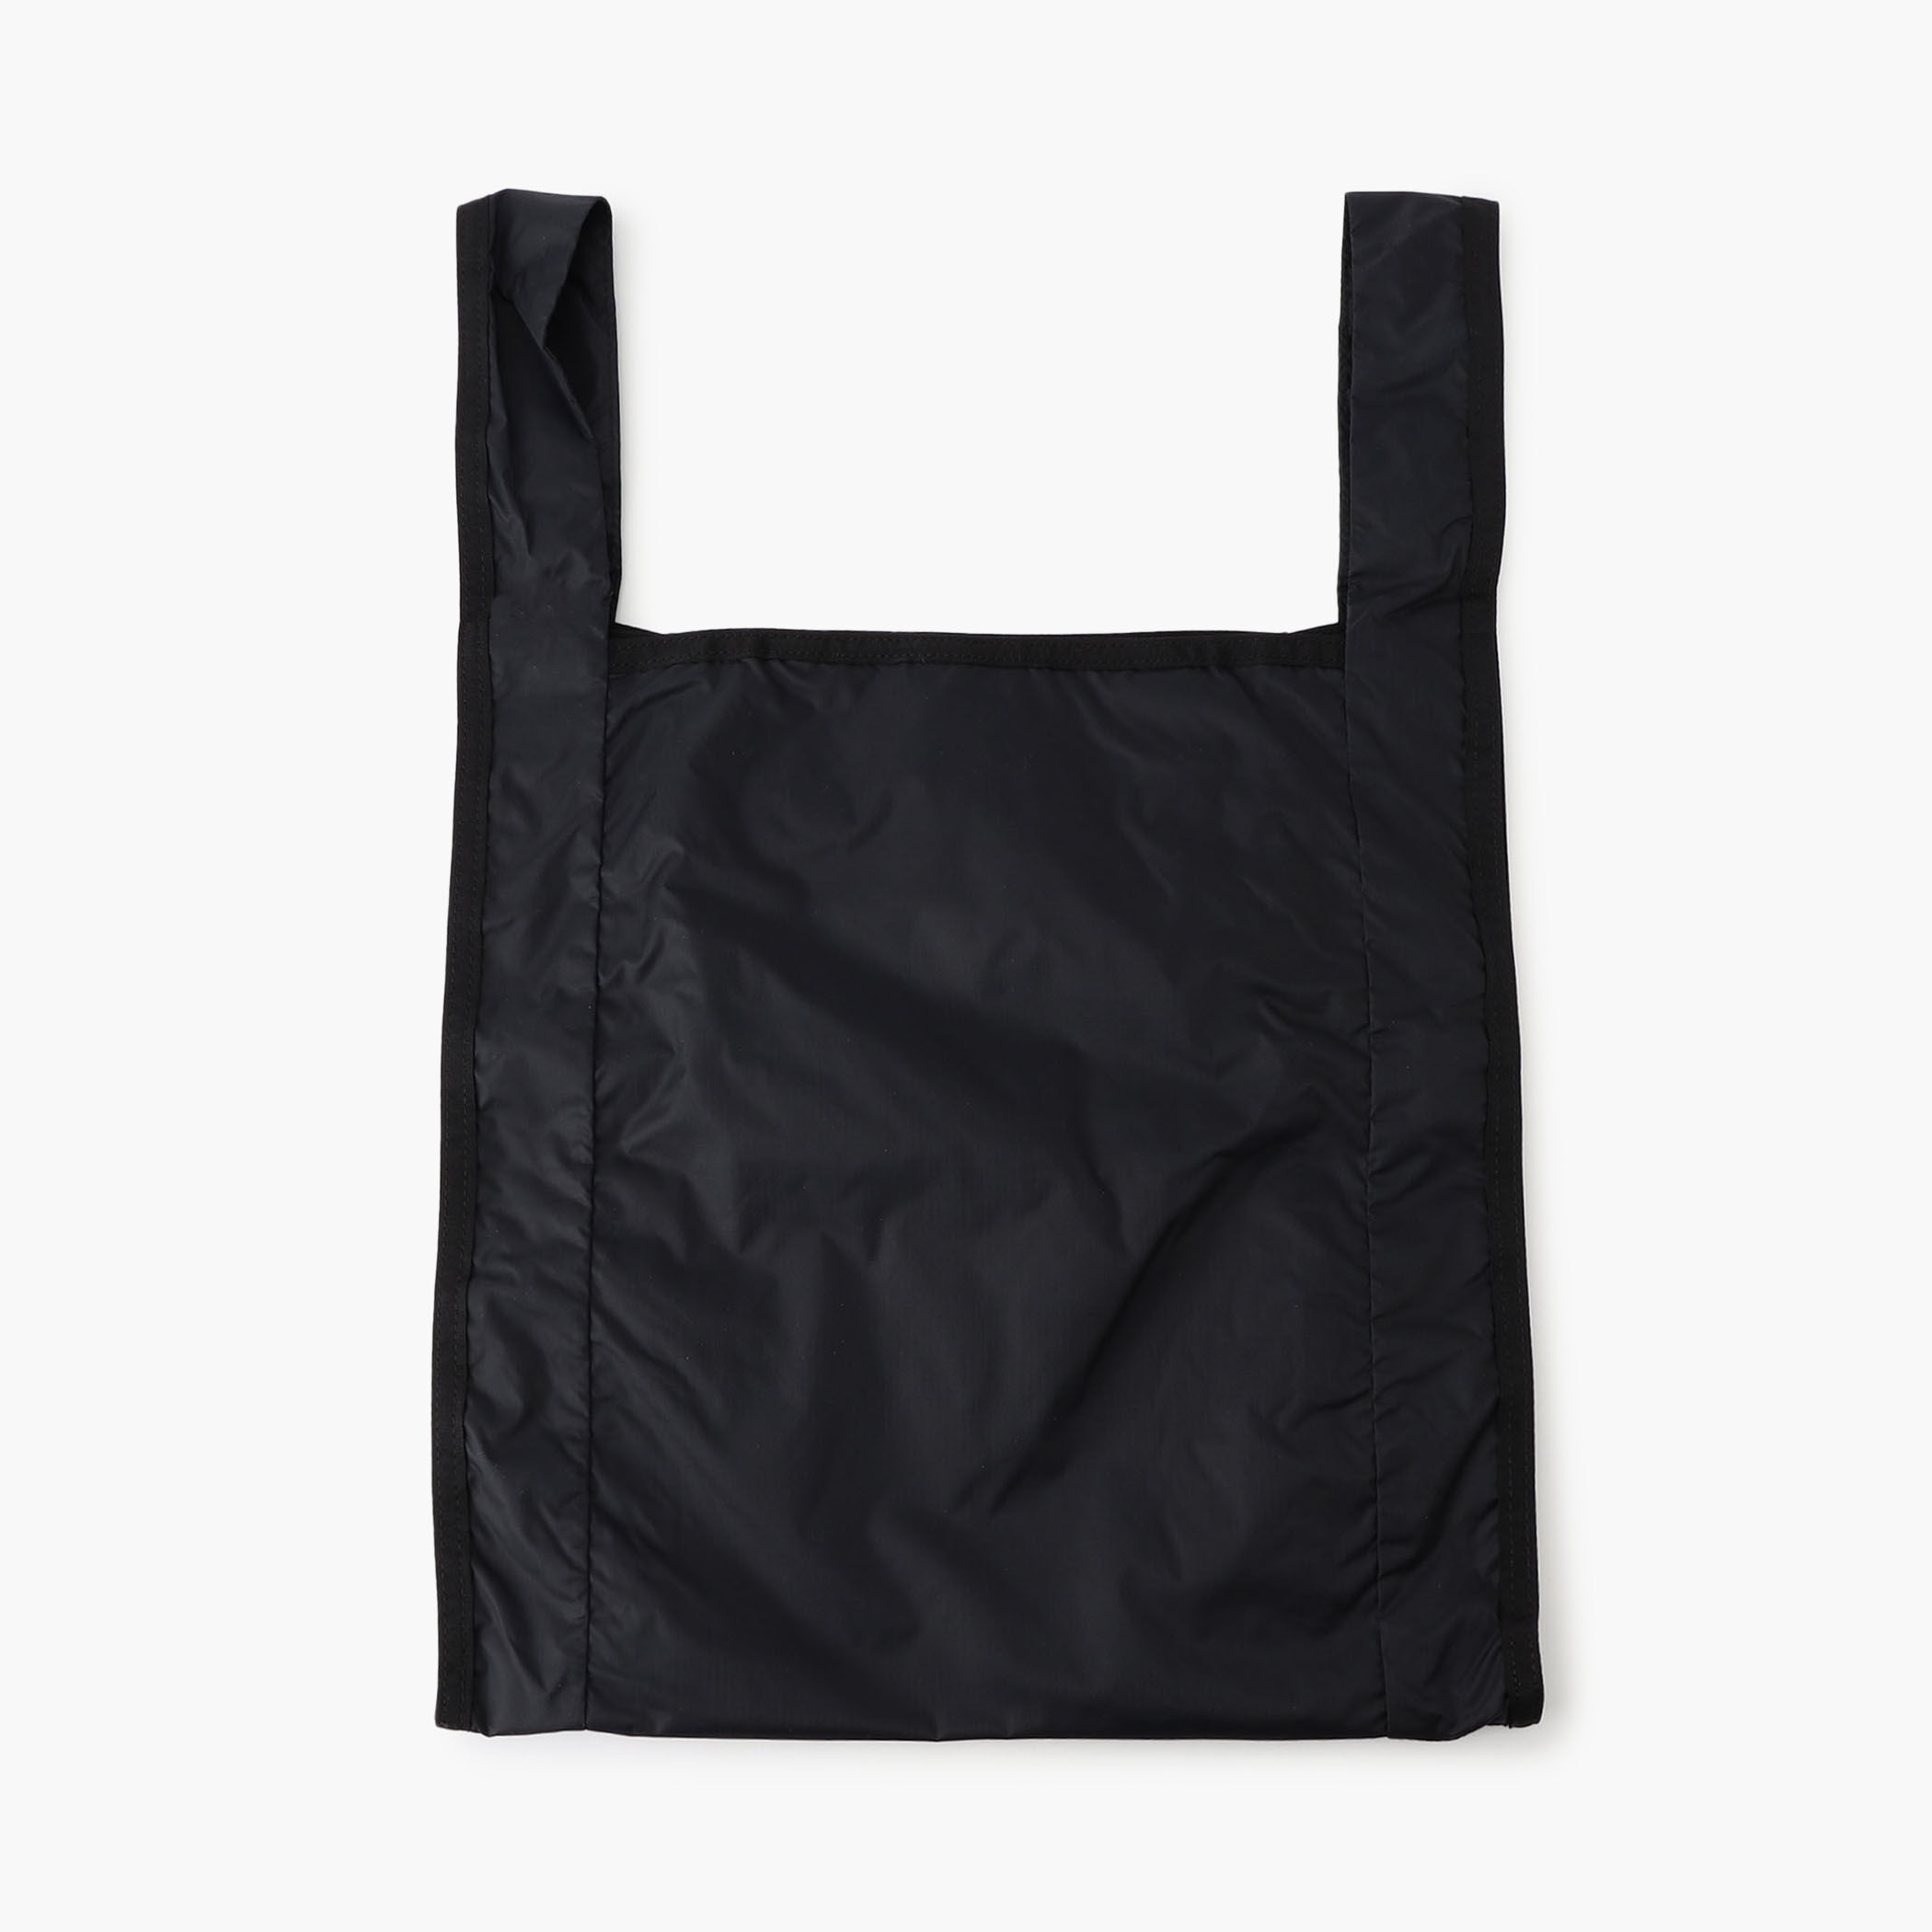 PACKABLE MARKET TOTE